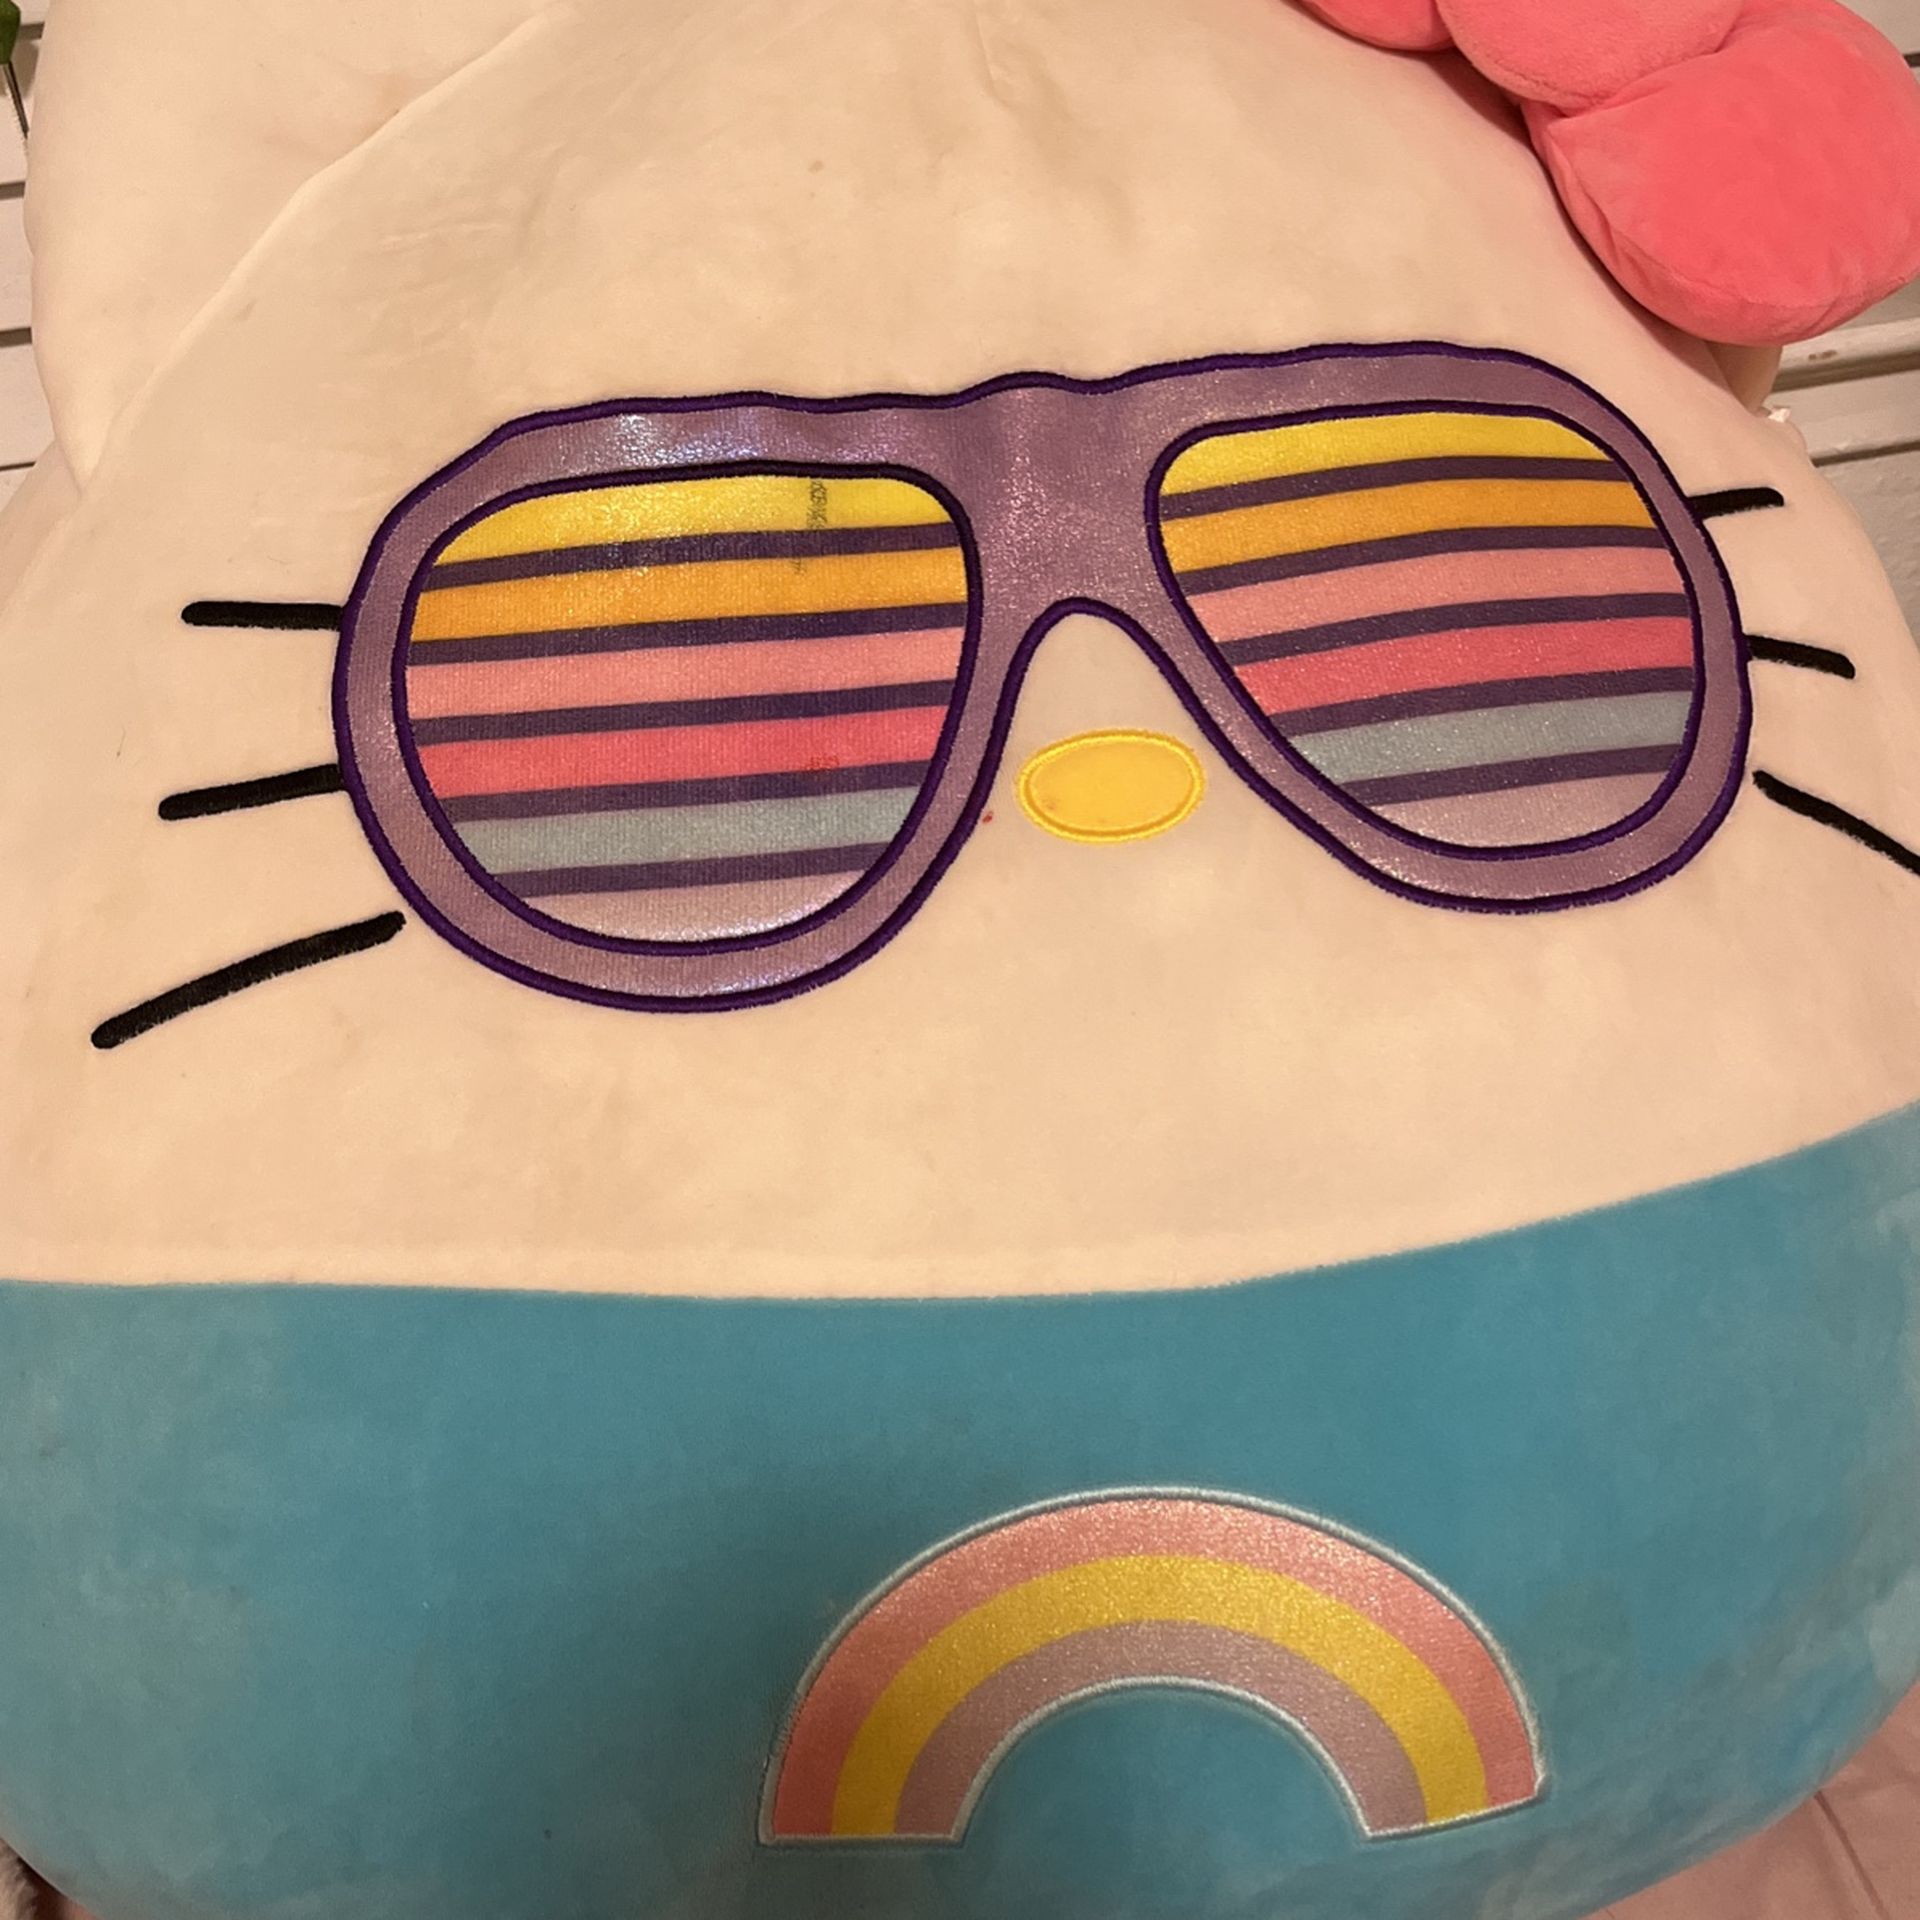 Big Hello Kitty Plushie With Glasses